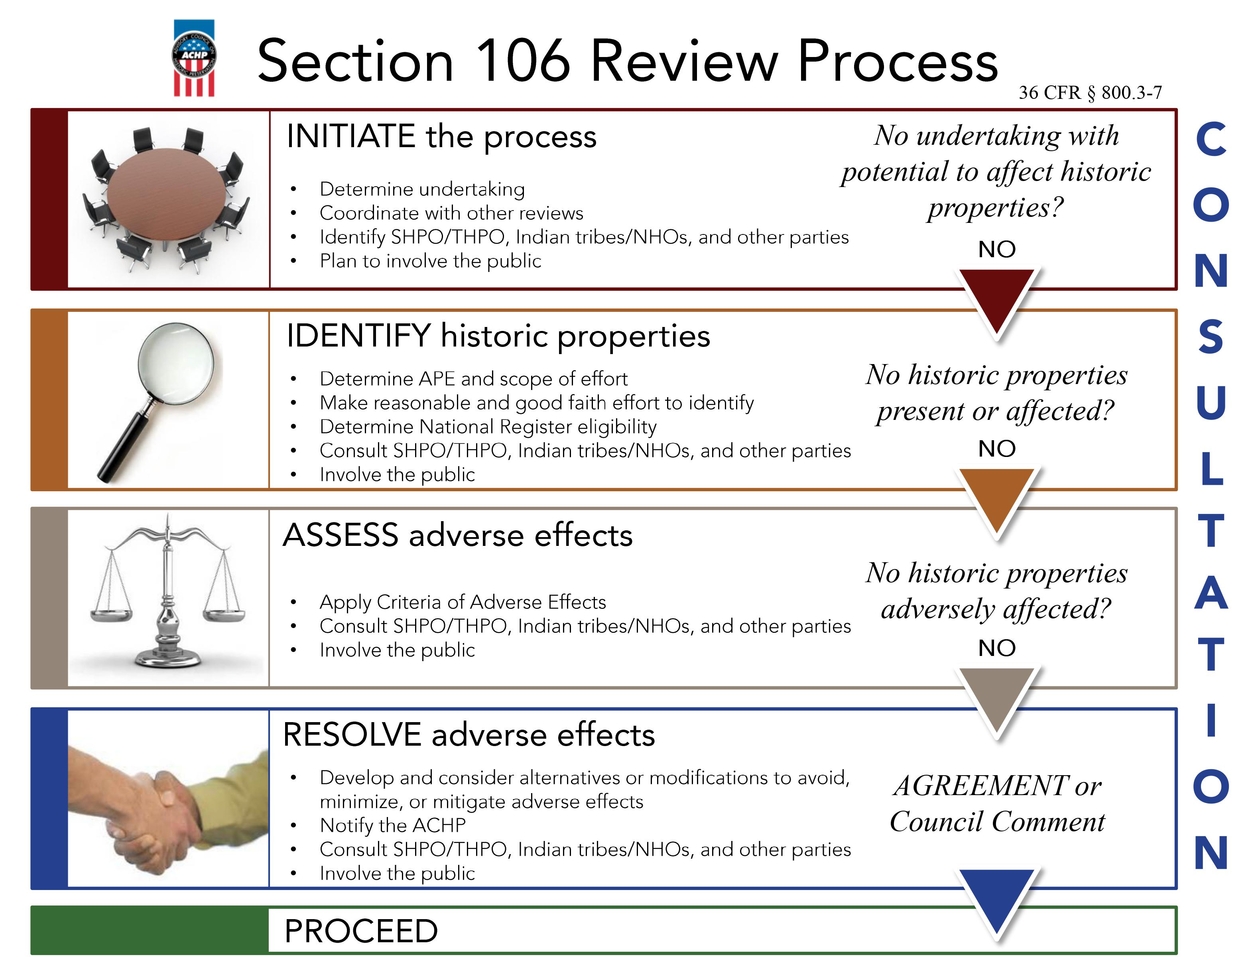 Section 106 review process